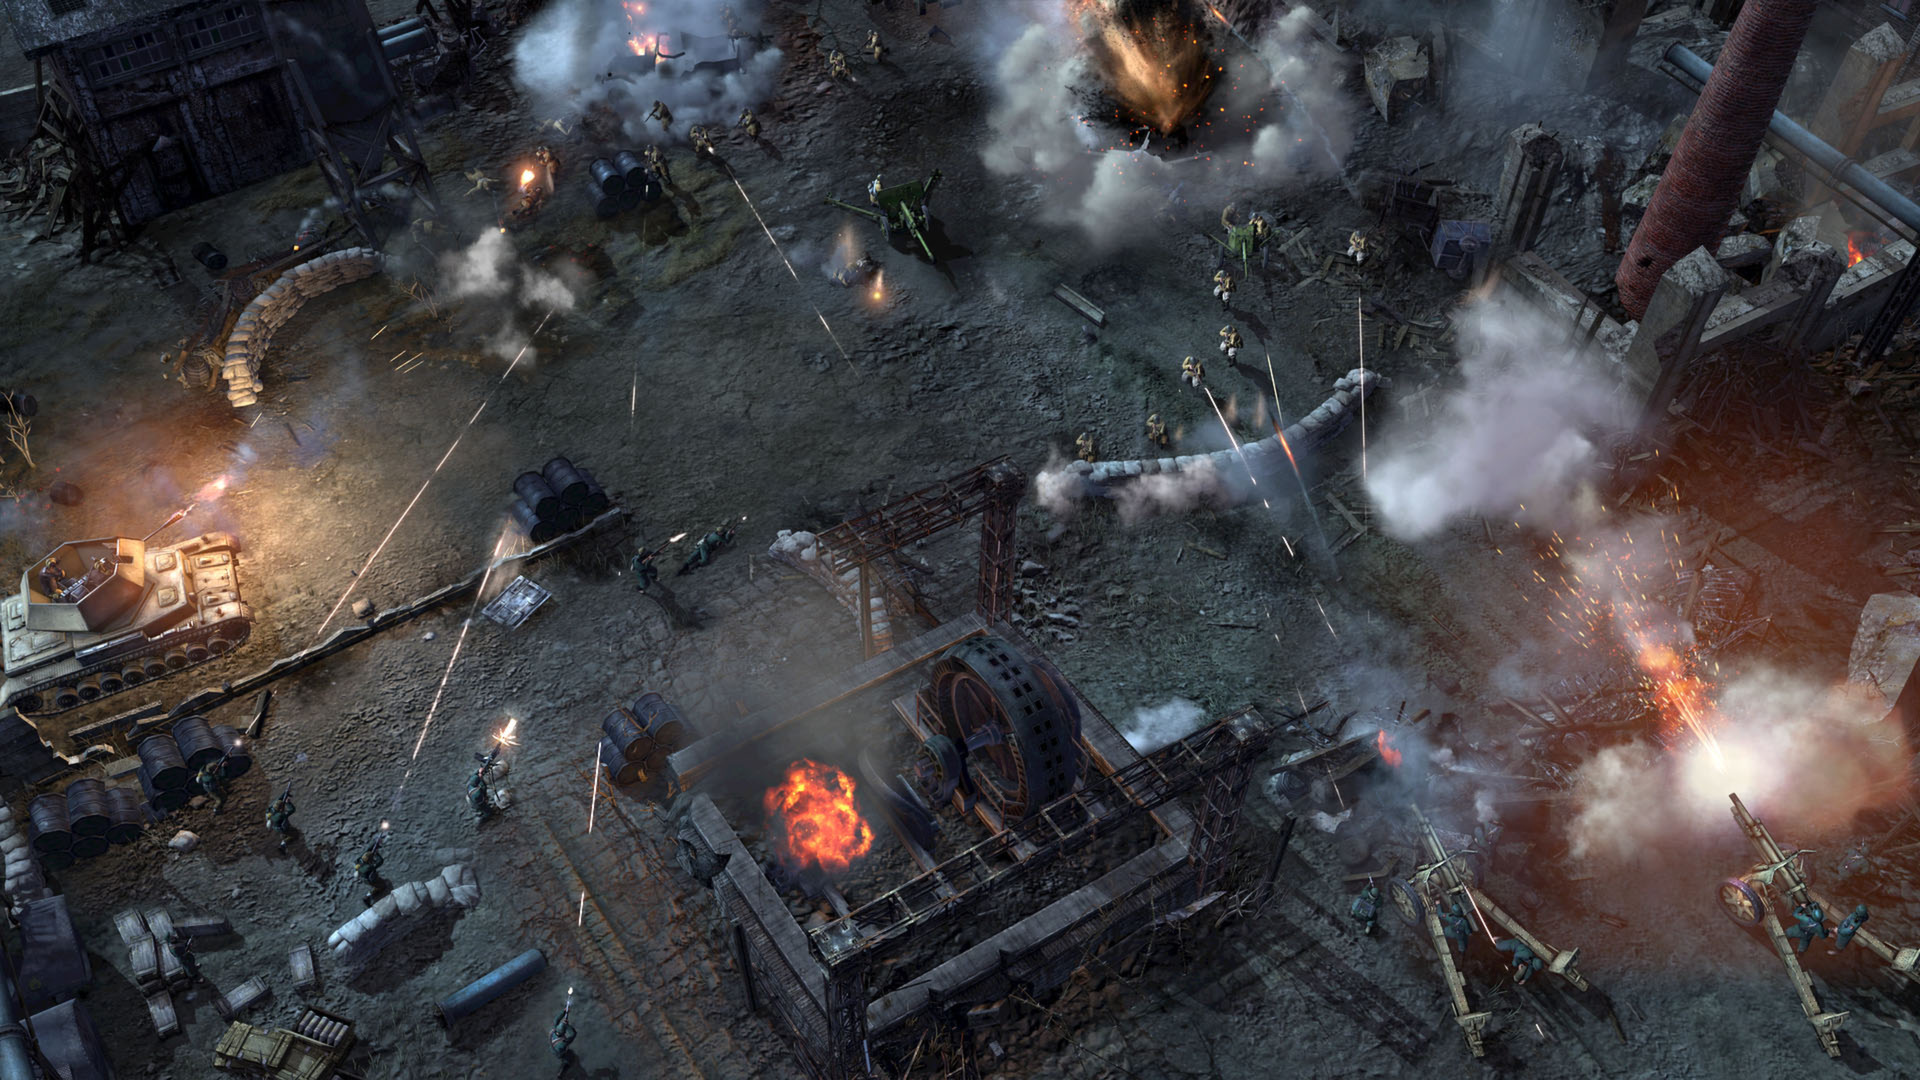 Company of Heroes 2 on Steam